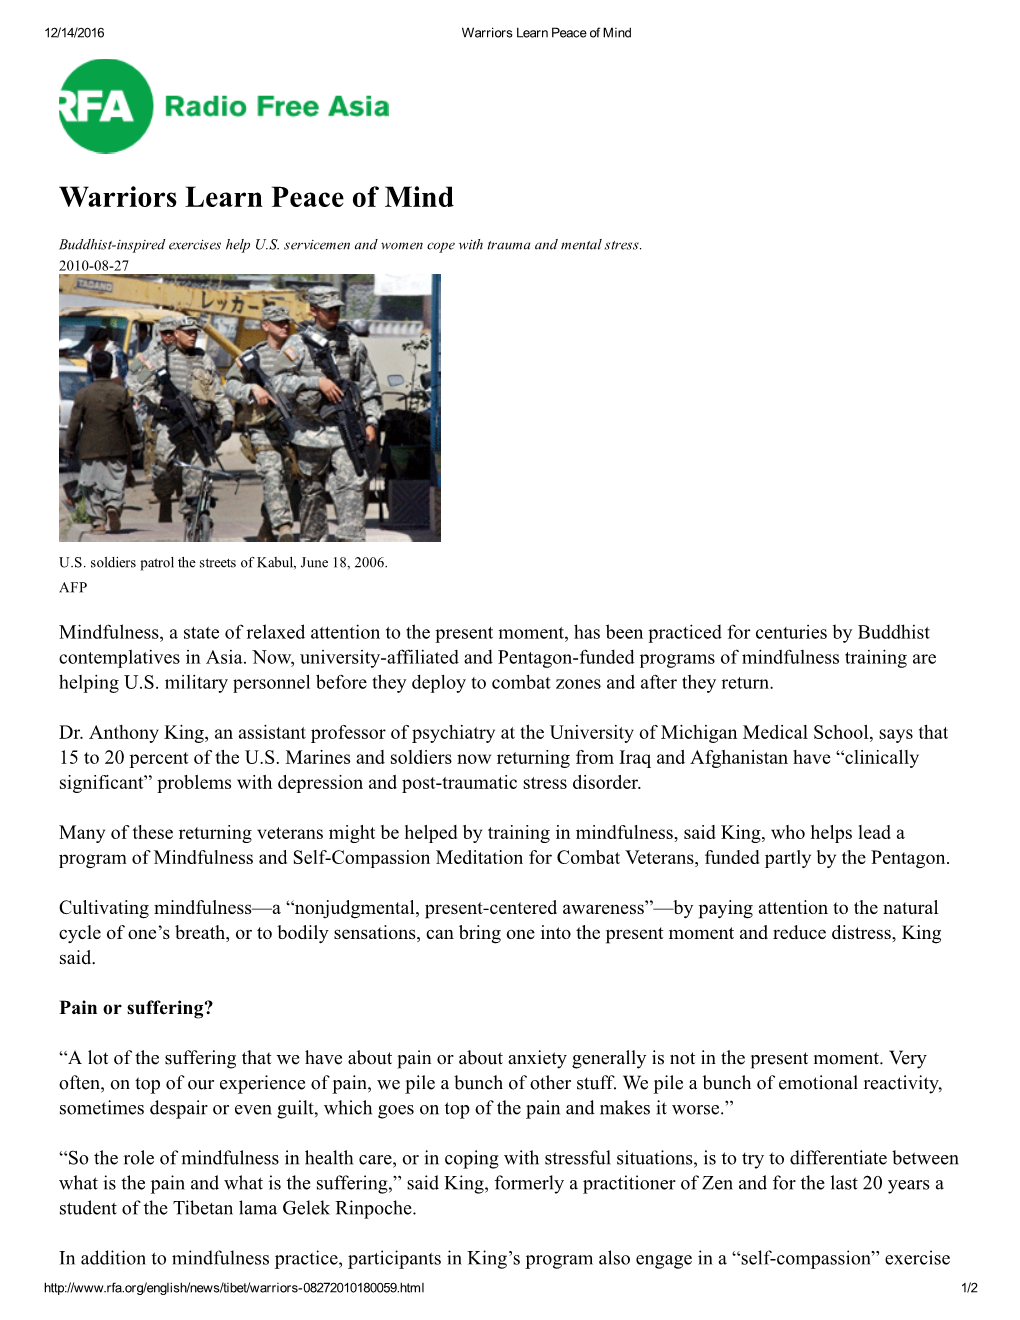 Warriors Learn Peace of Mind